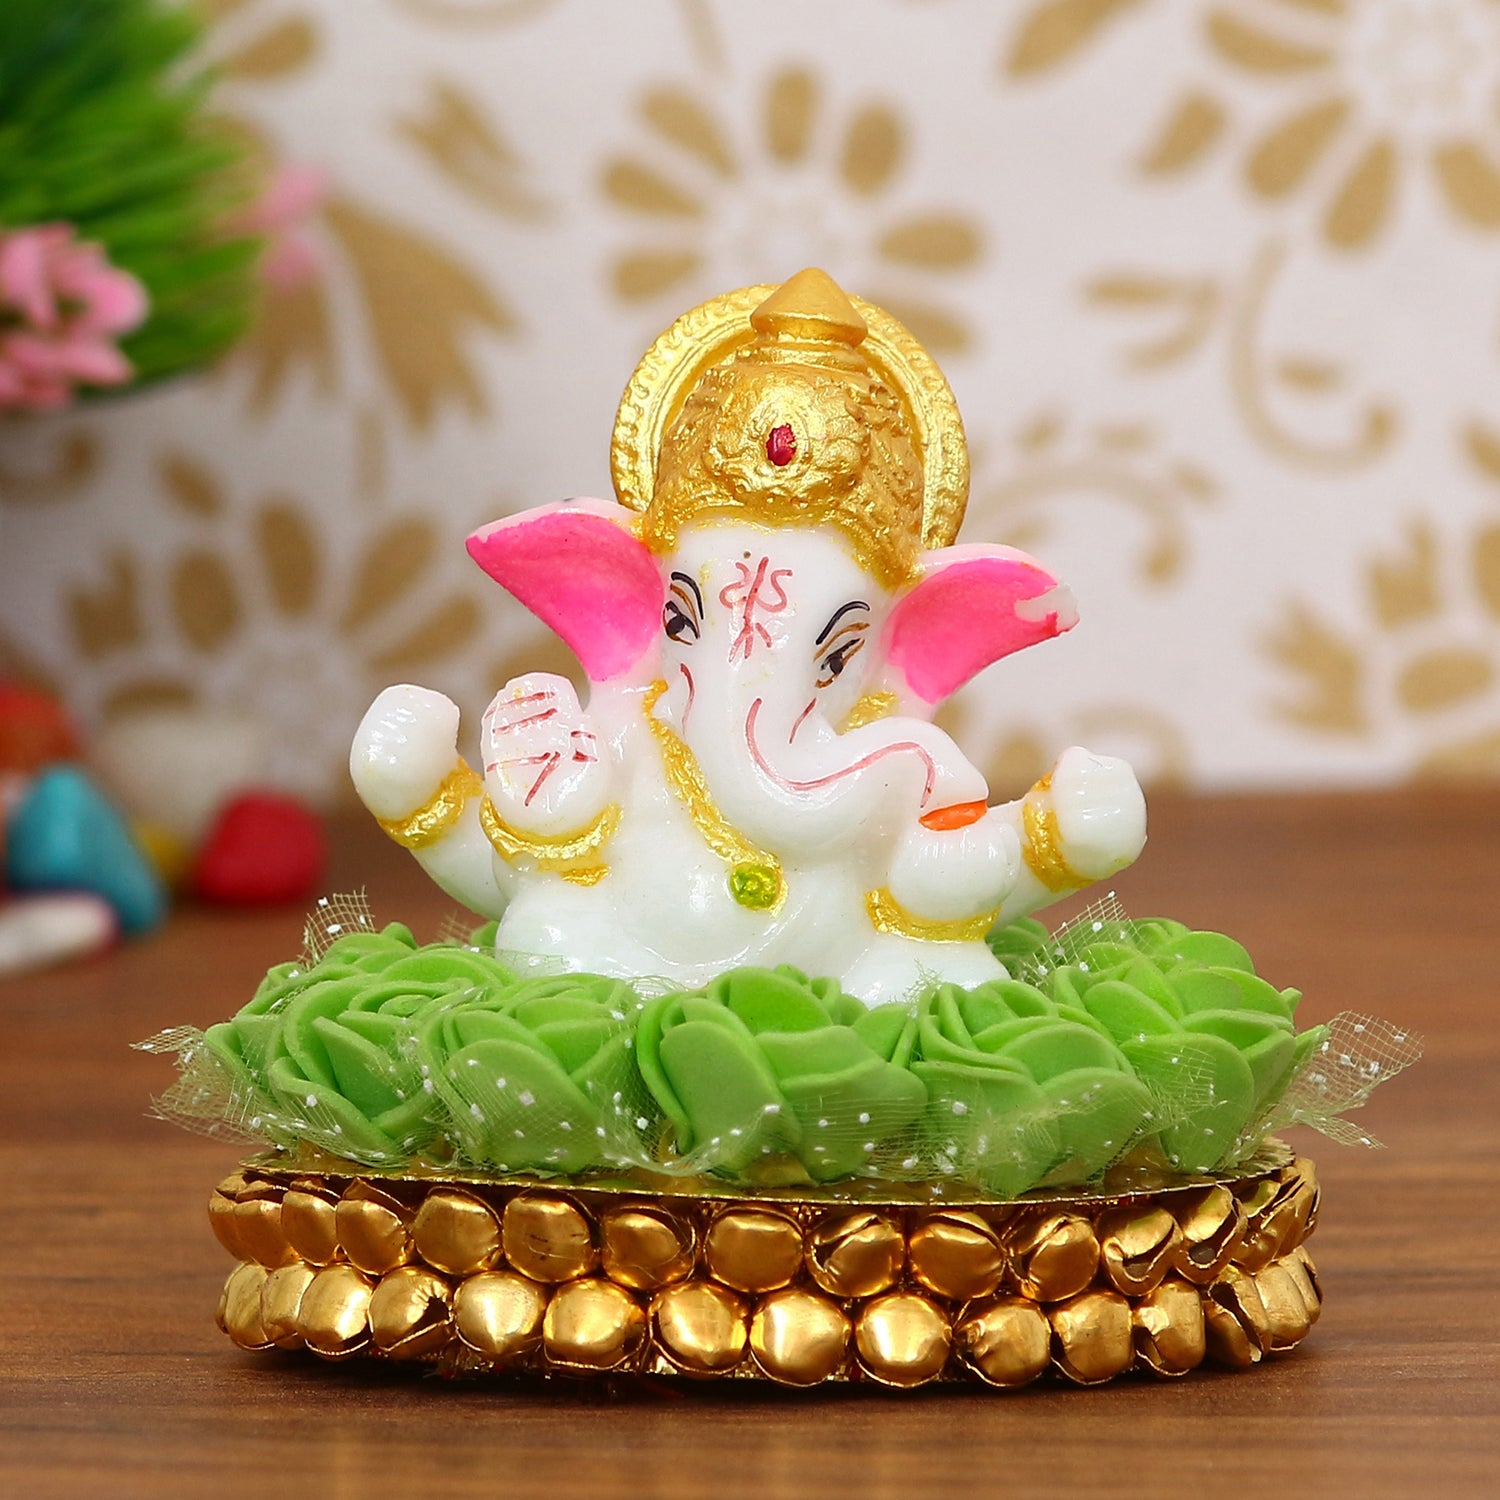 Lord Ganesha Idol on Decorative Handcrafted Plate with Green Flowers